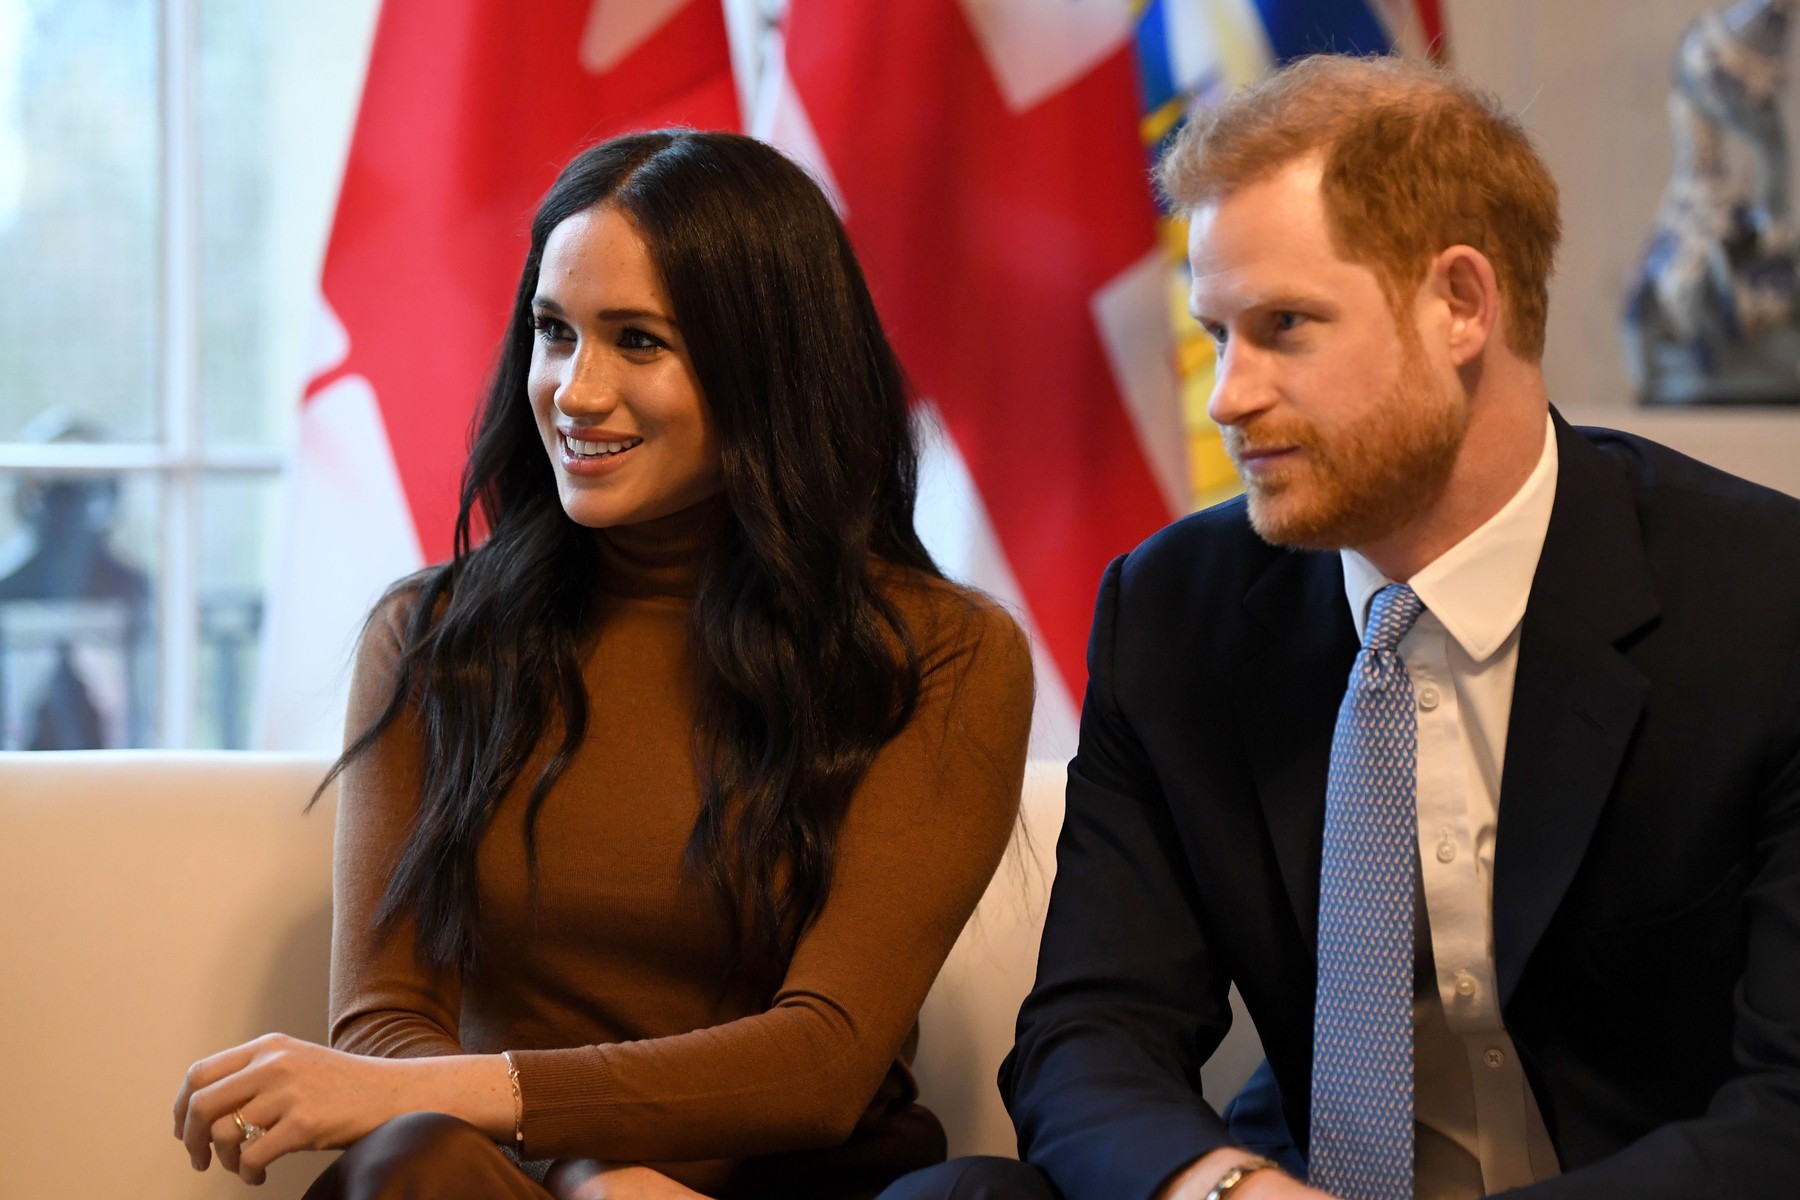 Prince Harry, Duke of Sussex and Meghan, Meghan Duchess of Sussex gesture during their visit to Canada House in thanks for the warm Canadian hospitality and support they received during their recent stay in Canada
Prince Harry and Meghan Duchess of Sussex visit to Canada House, London, UK - 07 Jan 2020, Image: 491481278, License: Rights-managed, Restrictions: , Model Release: no, Credit line: REX / Shutterstock Editorial / Profimedia